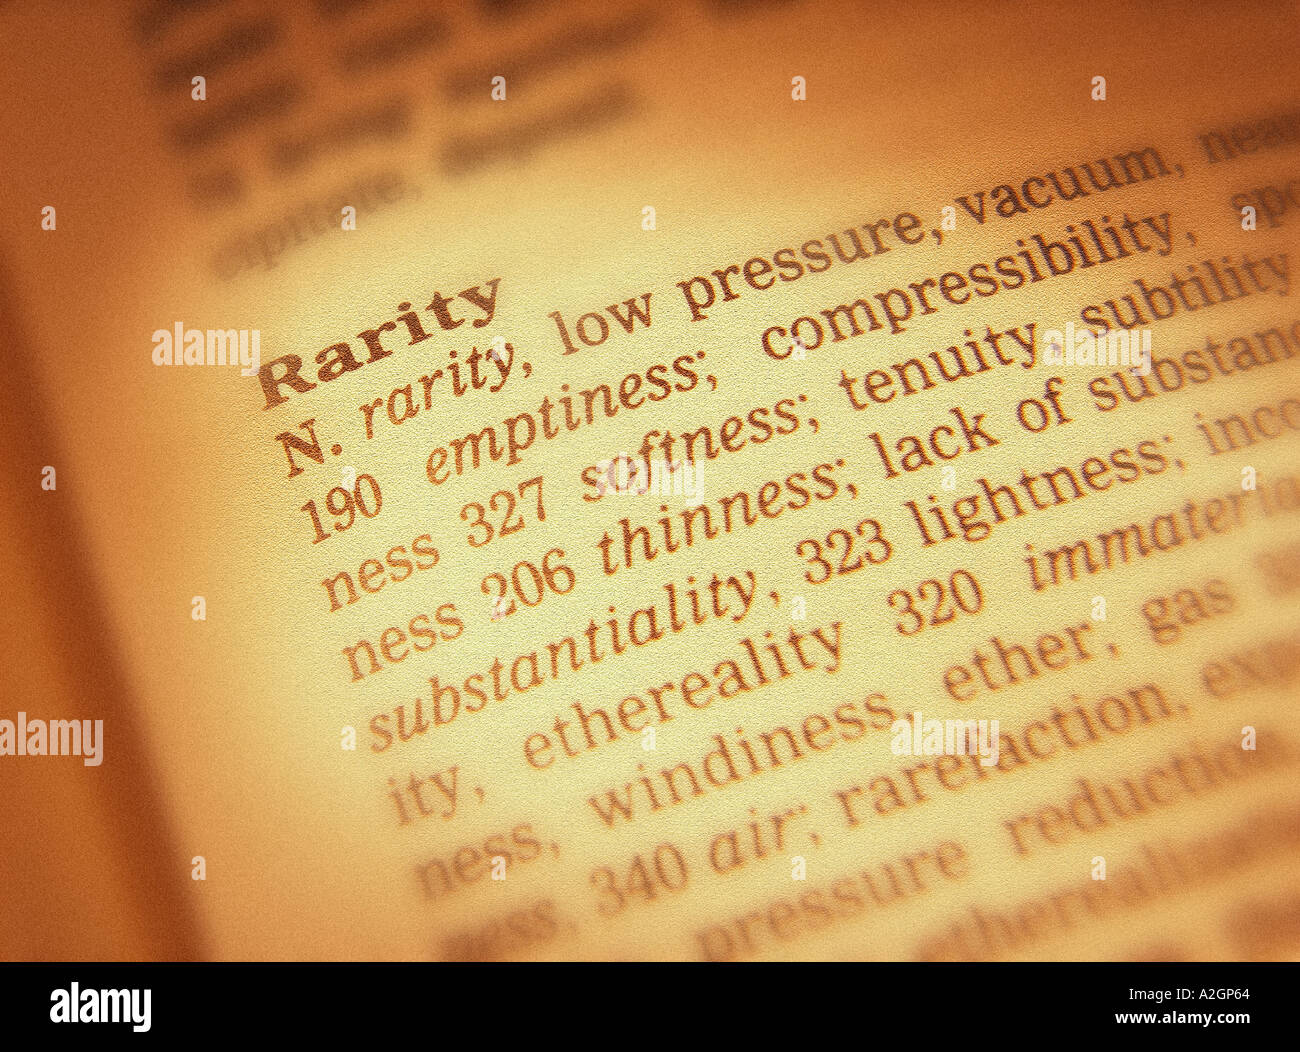 THESAURUS PAGE SHOWING DEFINITION OF WORD RARITY Stock Photo